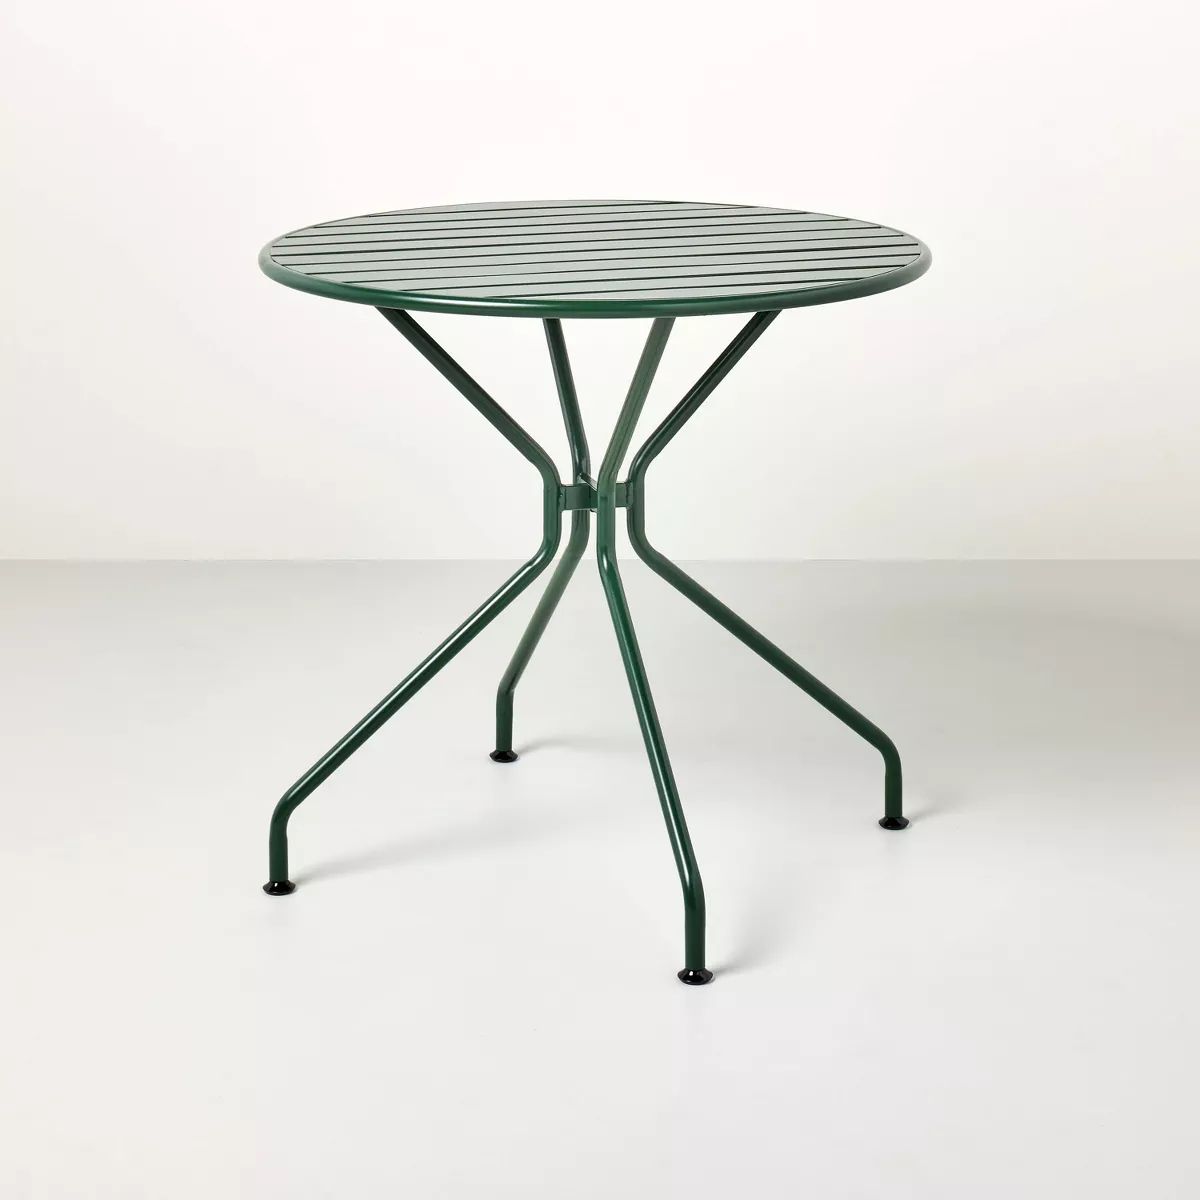 Slat Metal Round Outdoor Patio Bistro Table - Green - Hearth & Hand™ with Magnolia | Target